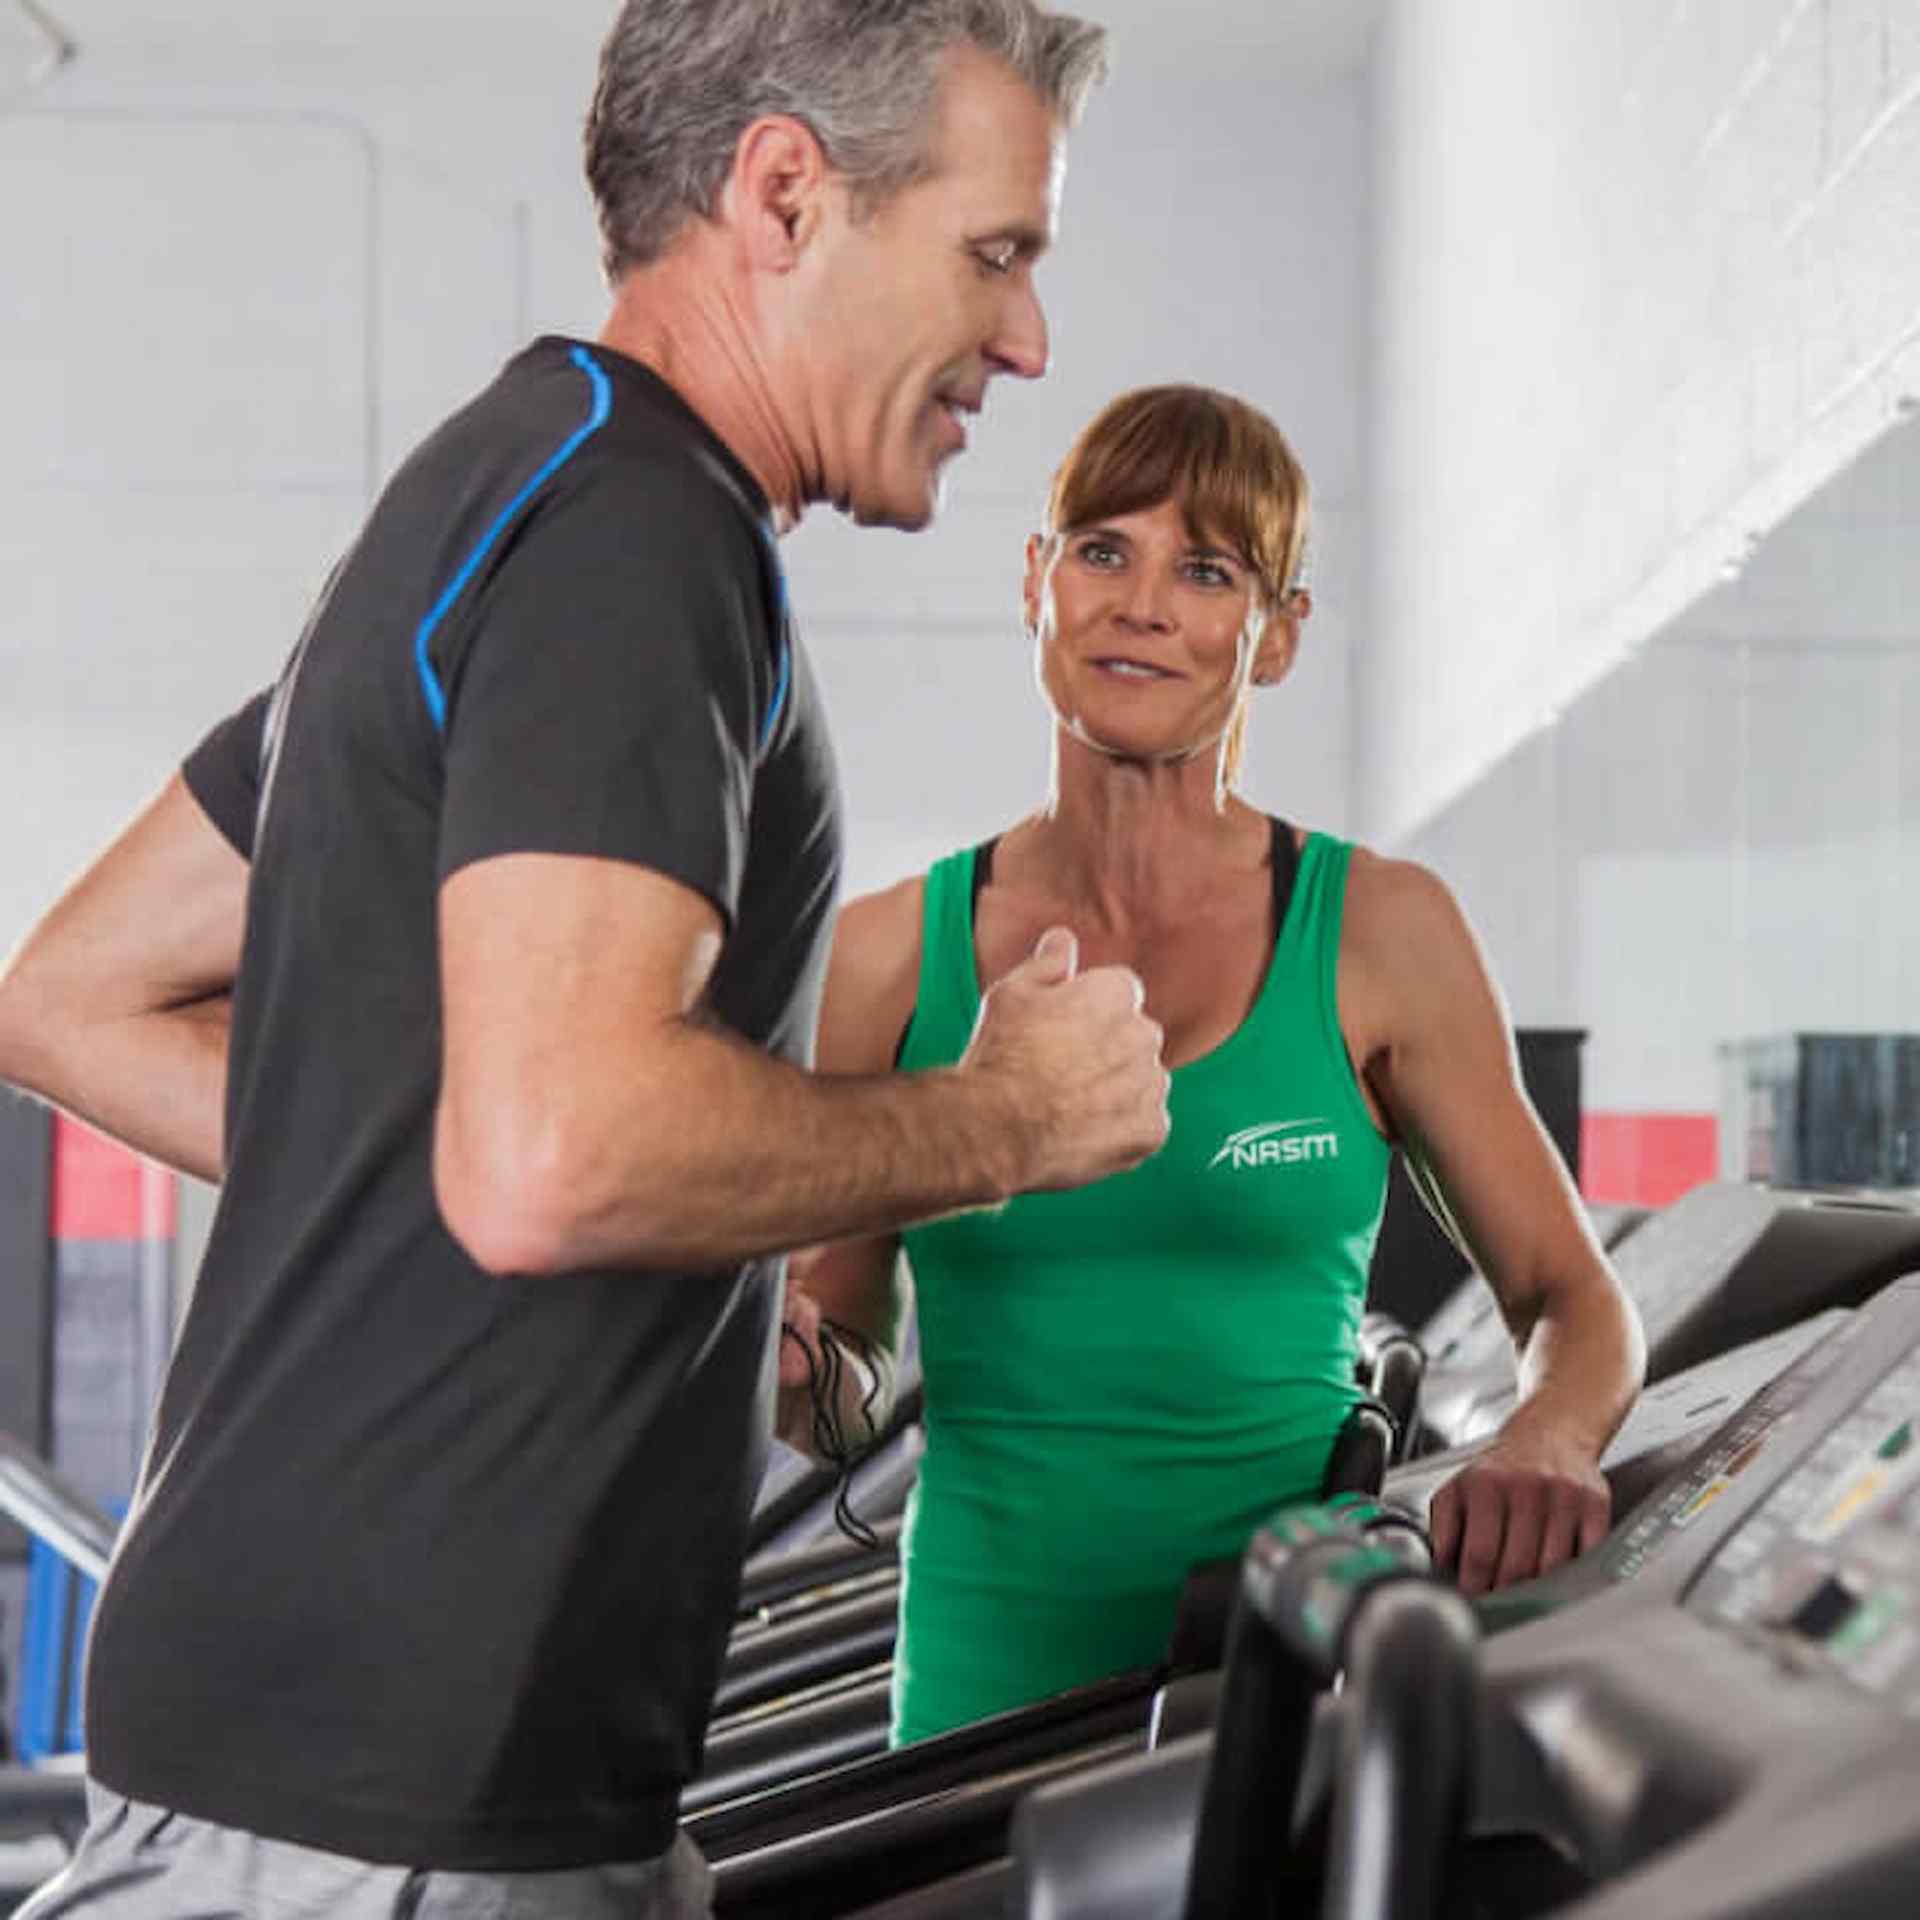 In-Home & Personal Trainer Programs for Seniors